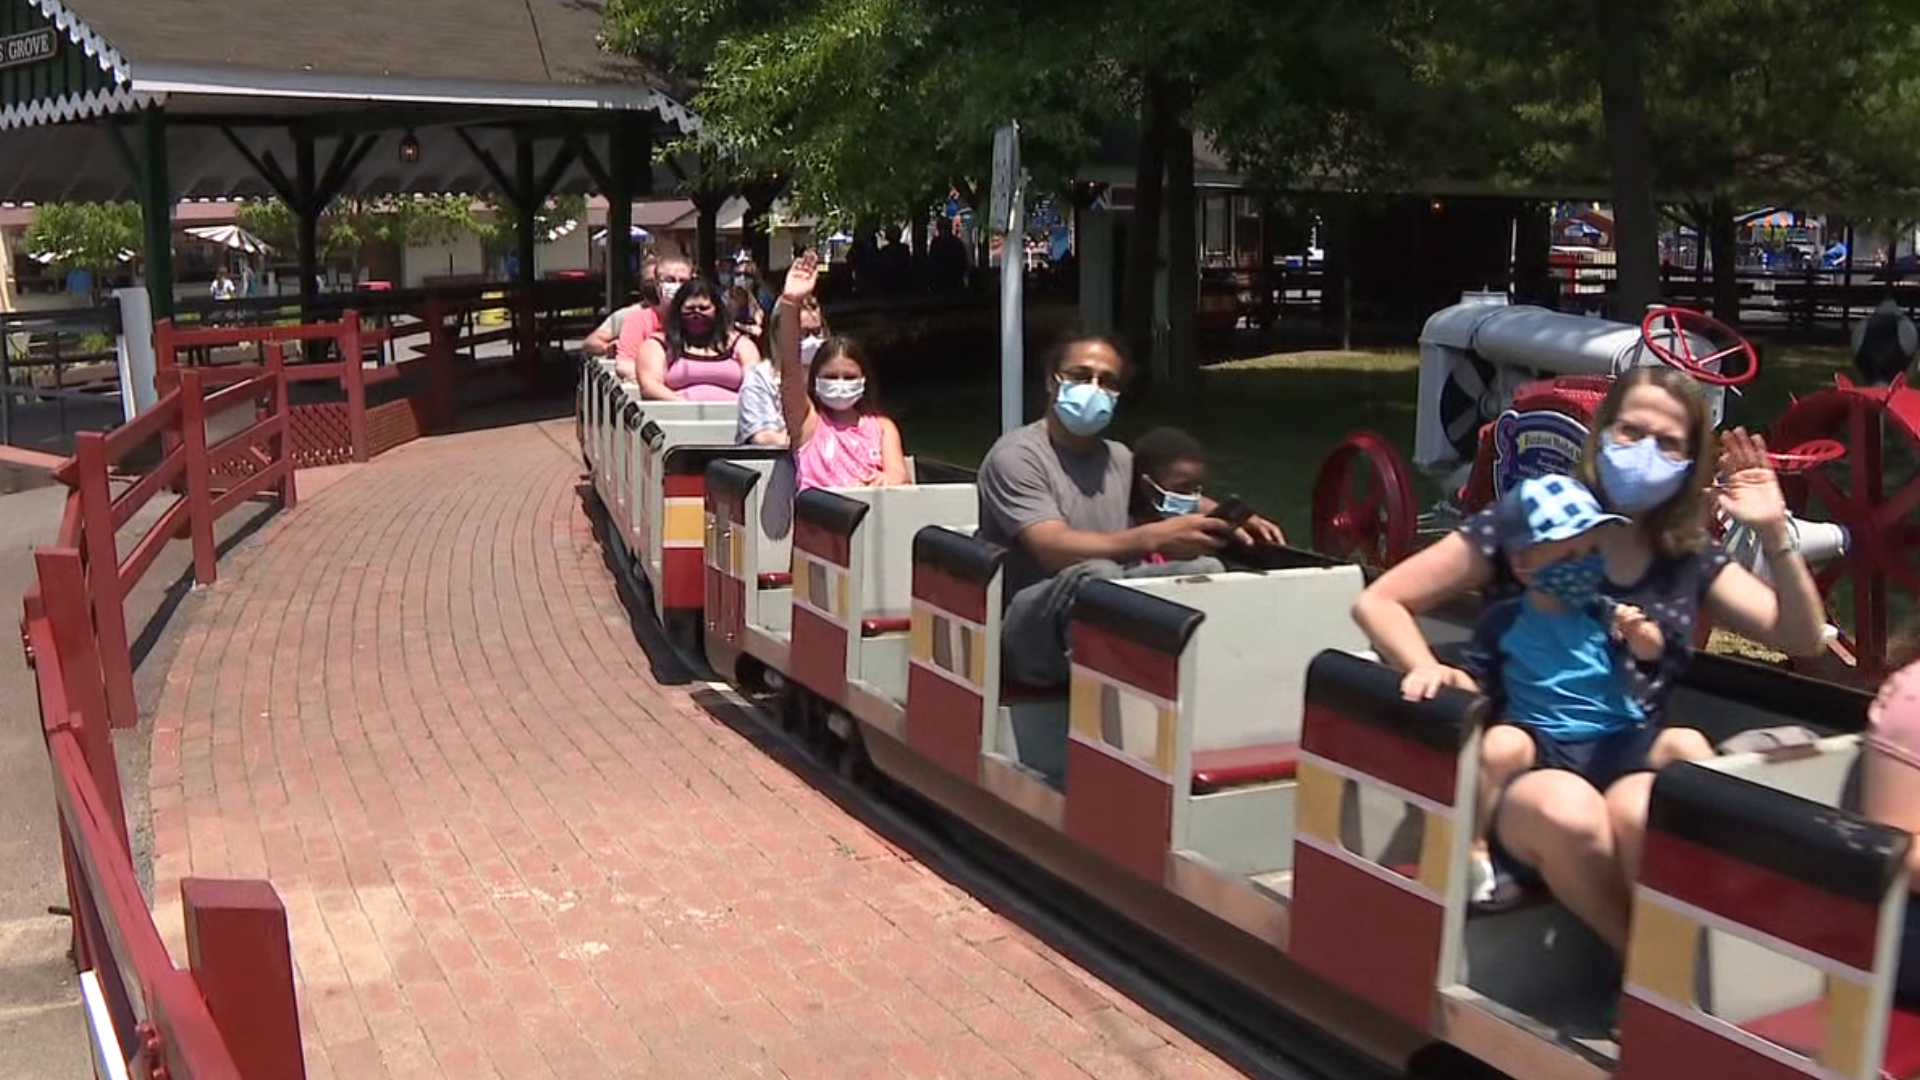 Fully vaccinated individuals will no longer need to wear masks on outdoor attractions.